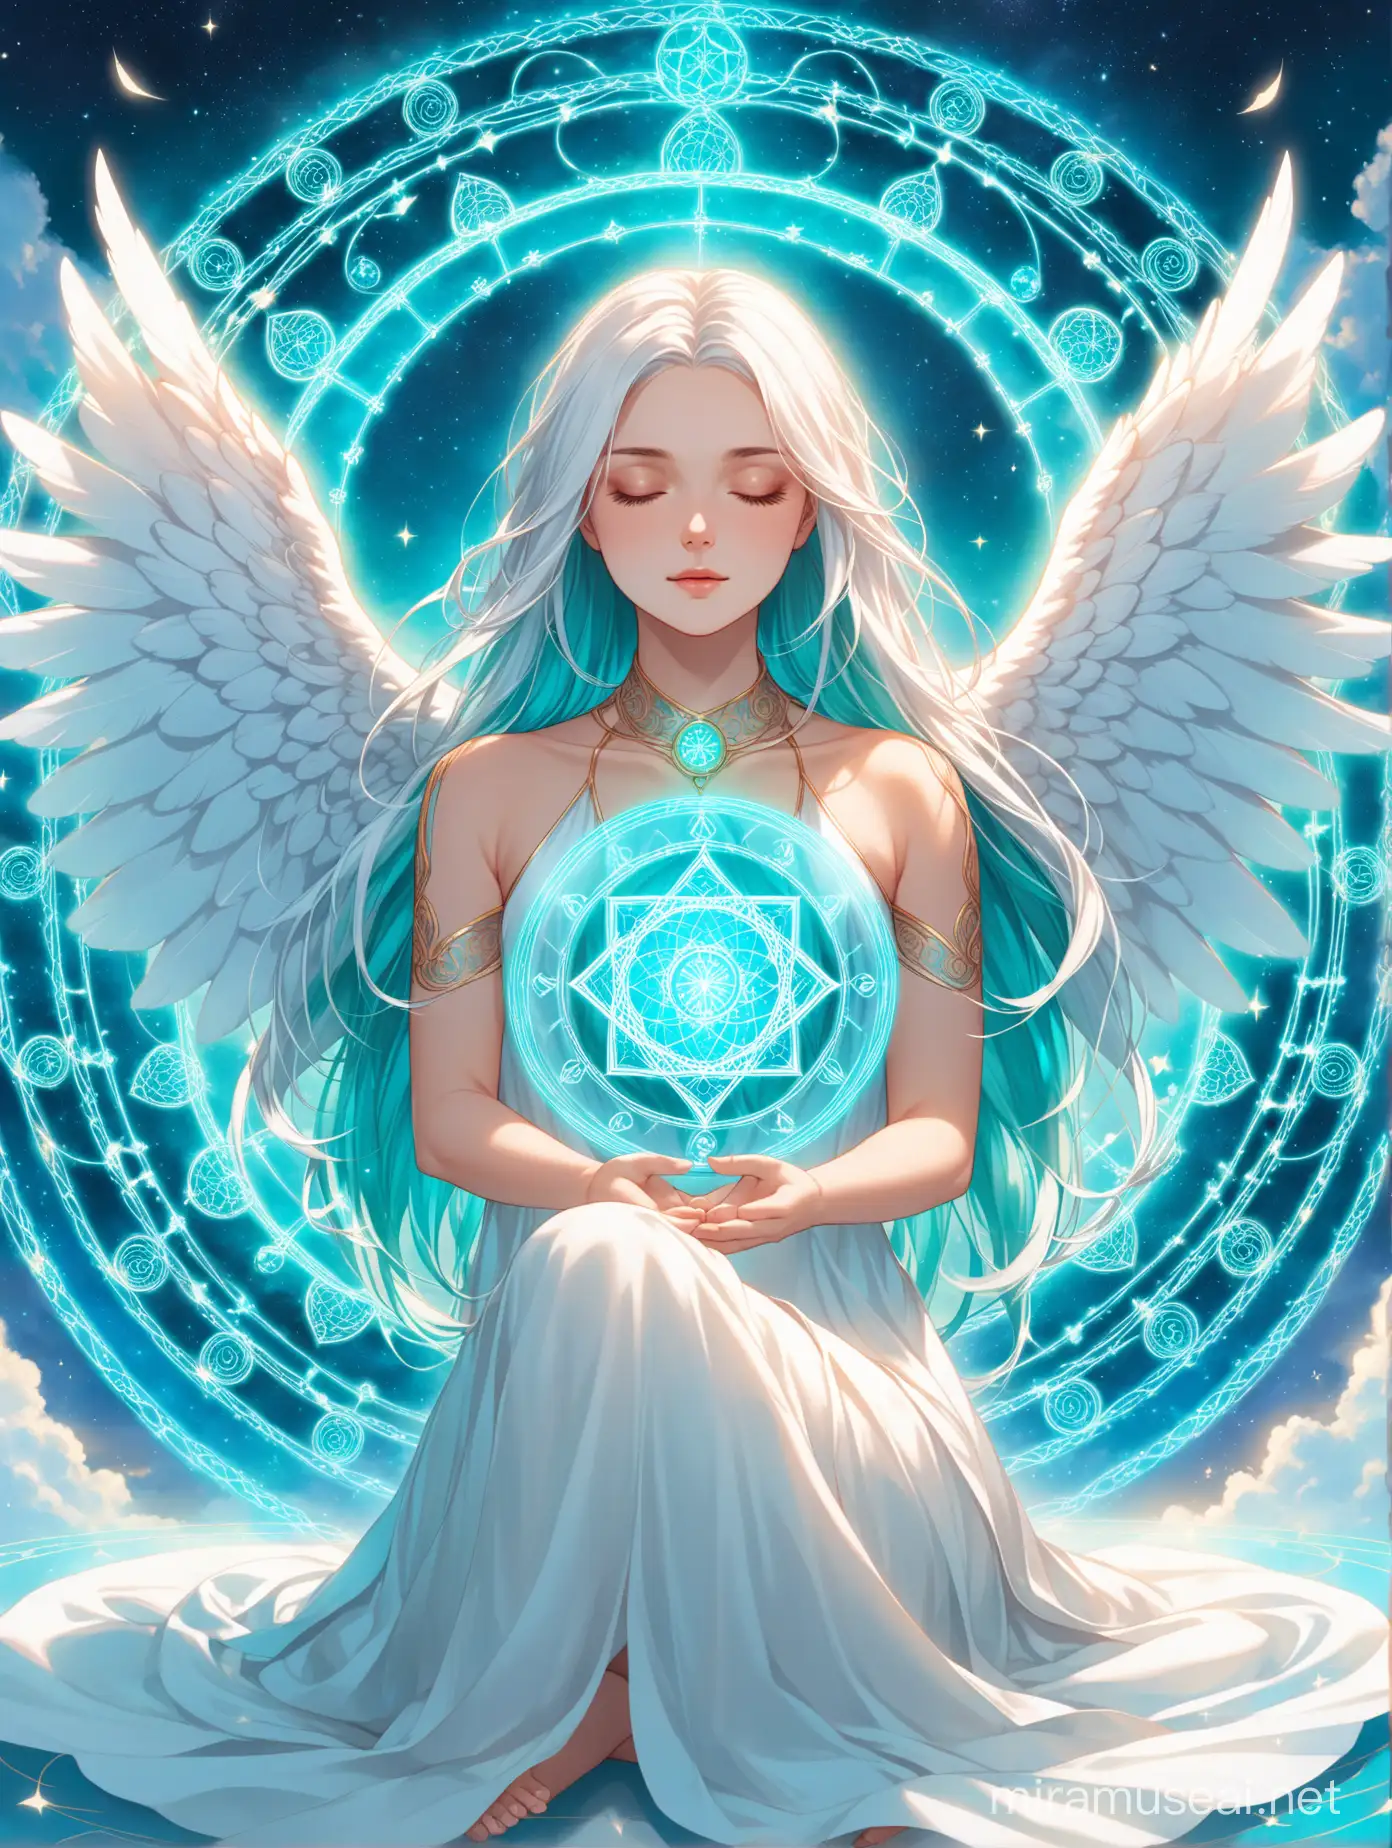 A 25 year old woman with long white hair, turquoise ends of her hair, turqoise eyes, wearing a white silk dress of a goddess, has white angel wings, is sitting in the sky meditating creating a turquoise magic circle. Her eyes are closed. as she is focusing on the circle in front of her. She looks ethereal, she is a goddess